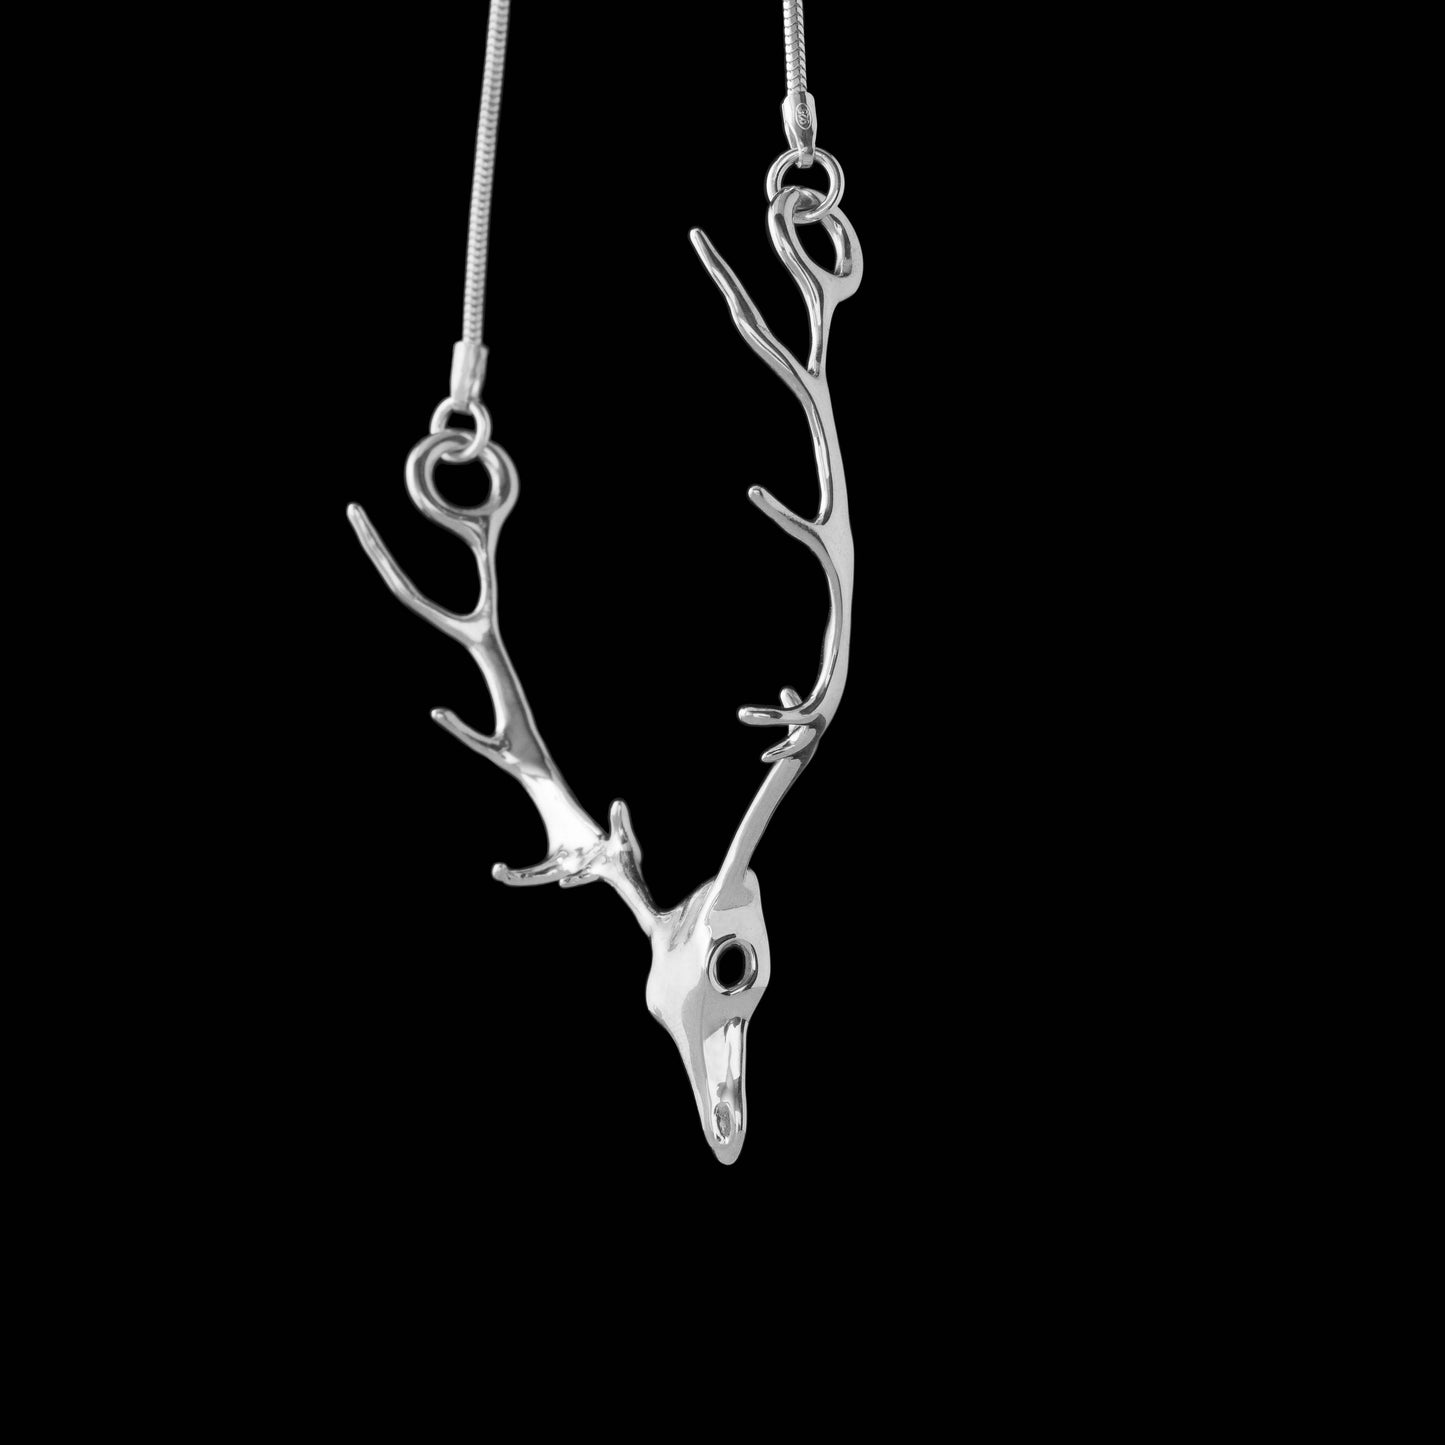 Stag antler necklace made in sterling silver with a silver chain.